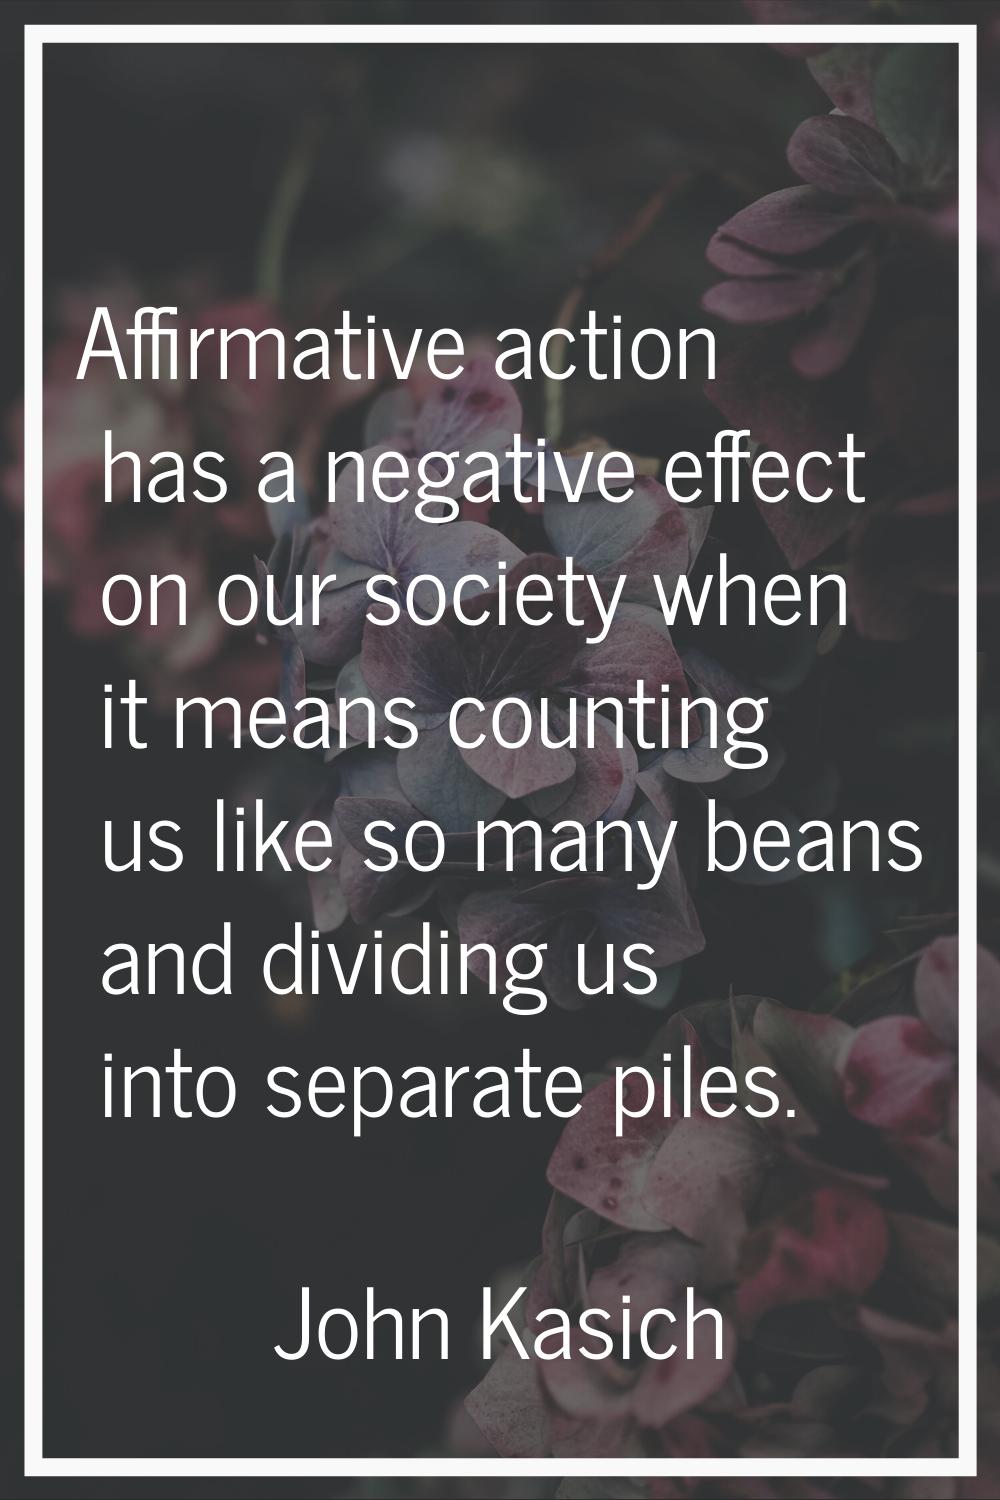 Affirmative action has a negative effect on our society when it means counting us like so many bean